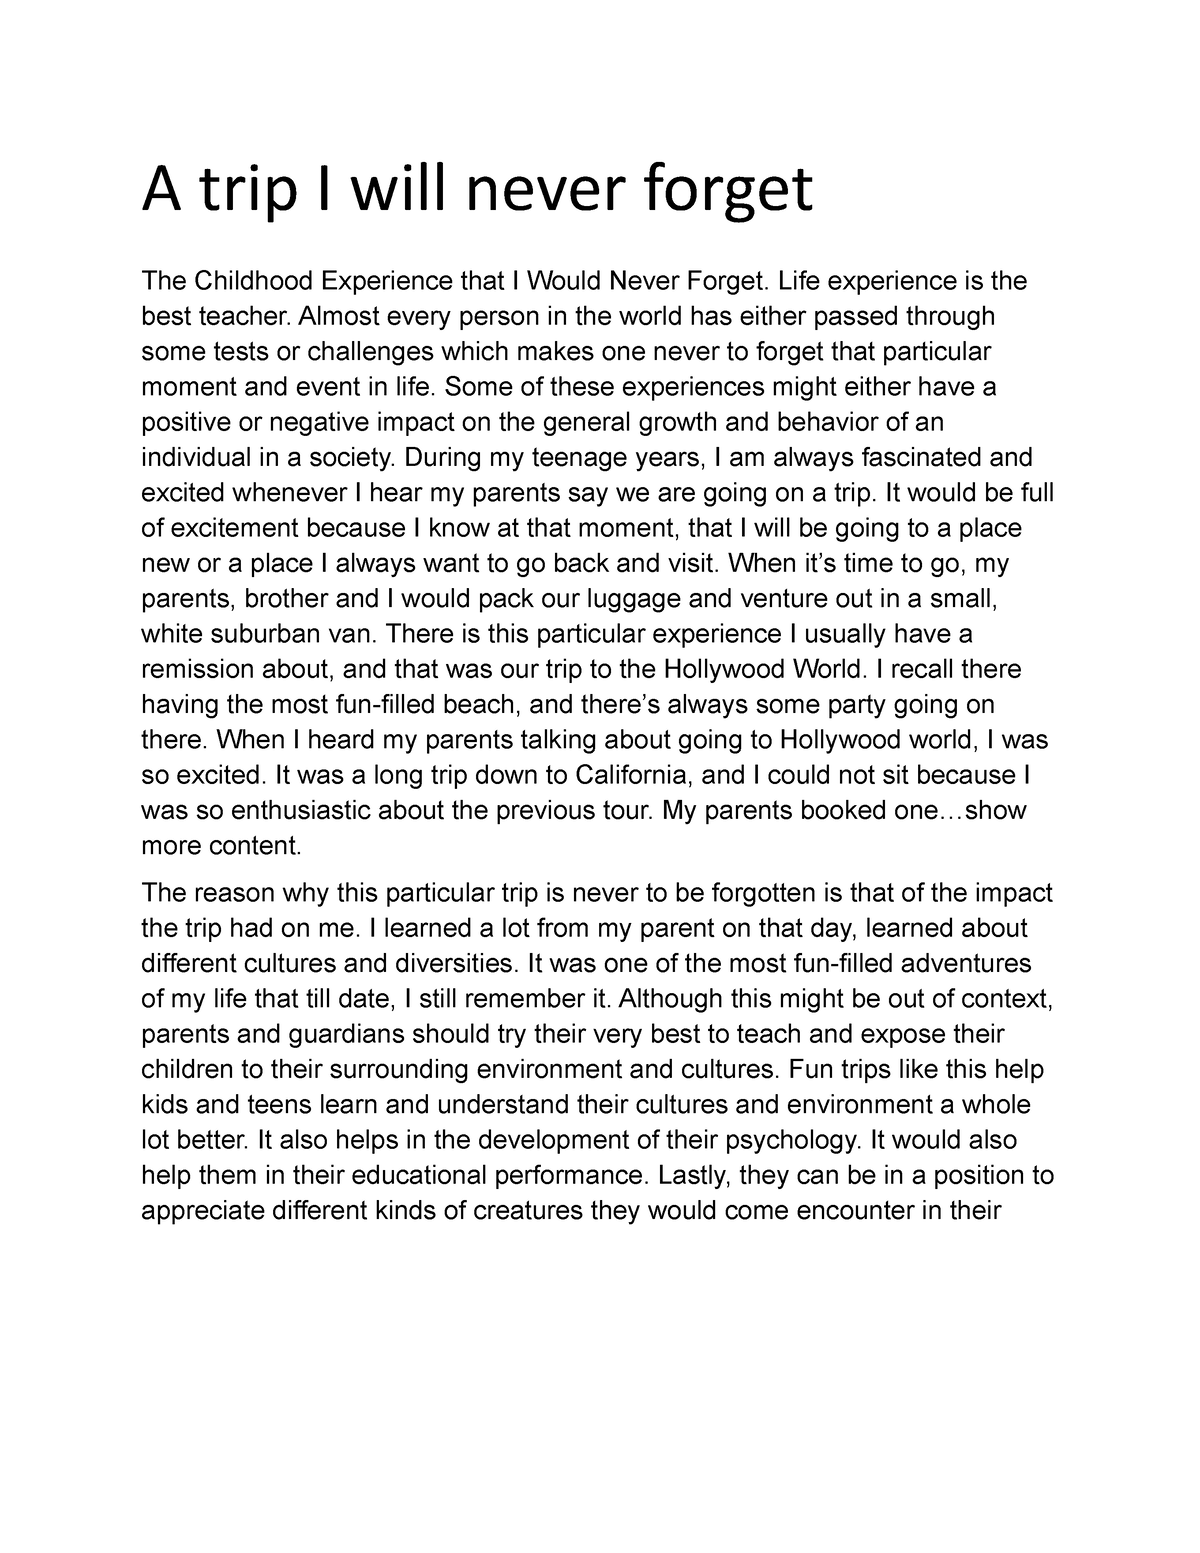 narrative essay a trip you will never forget